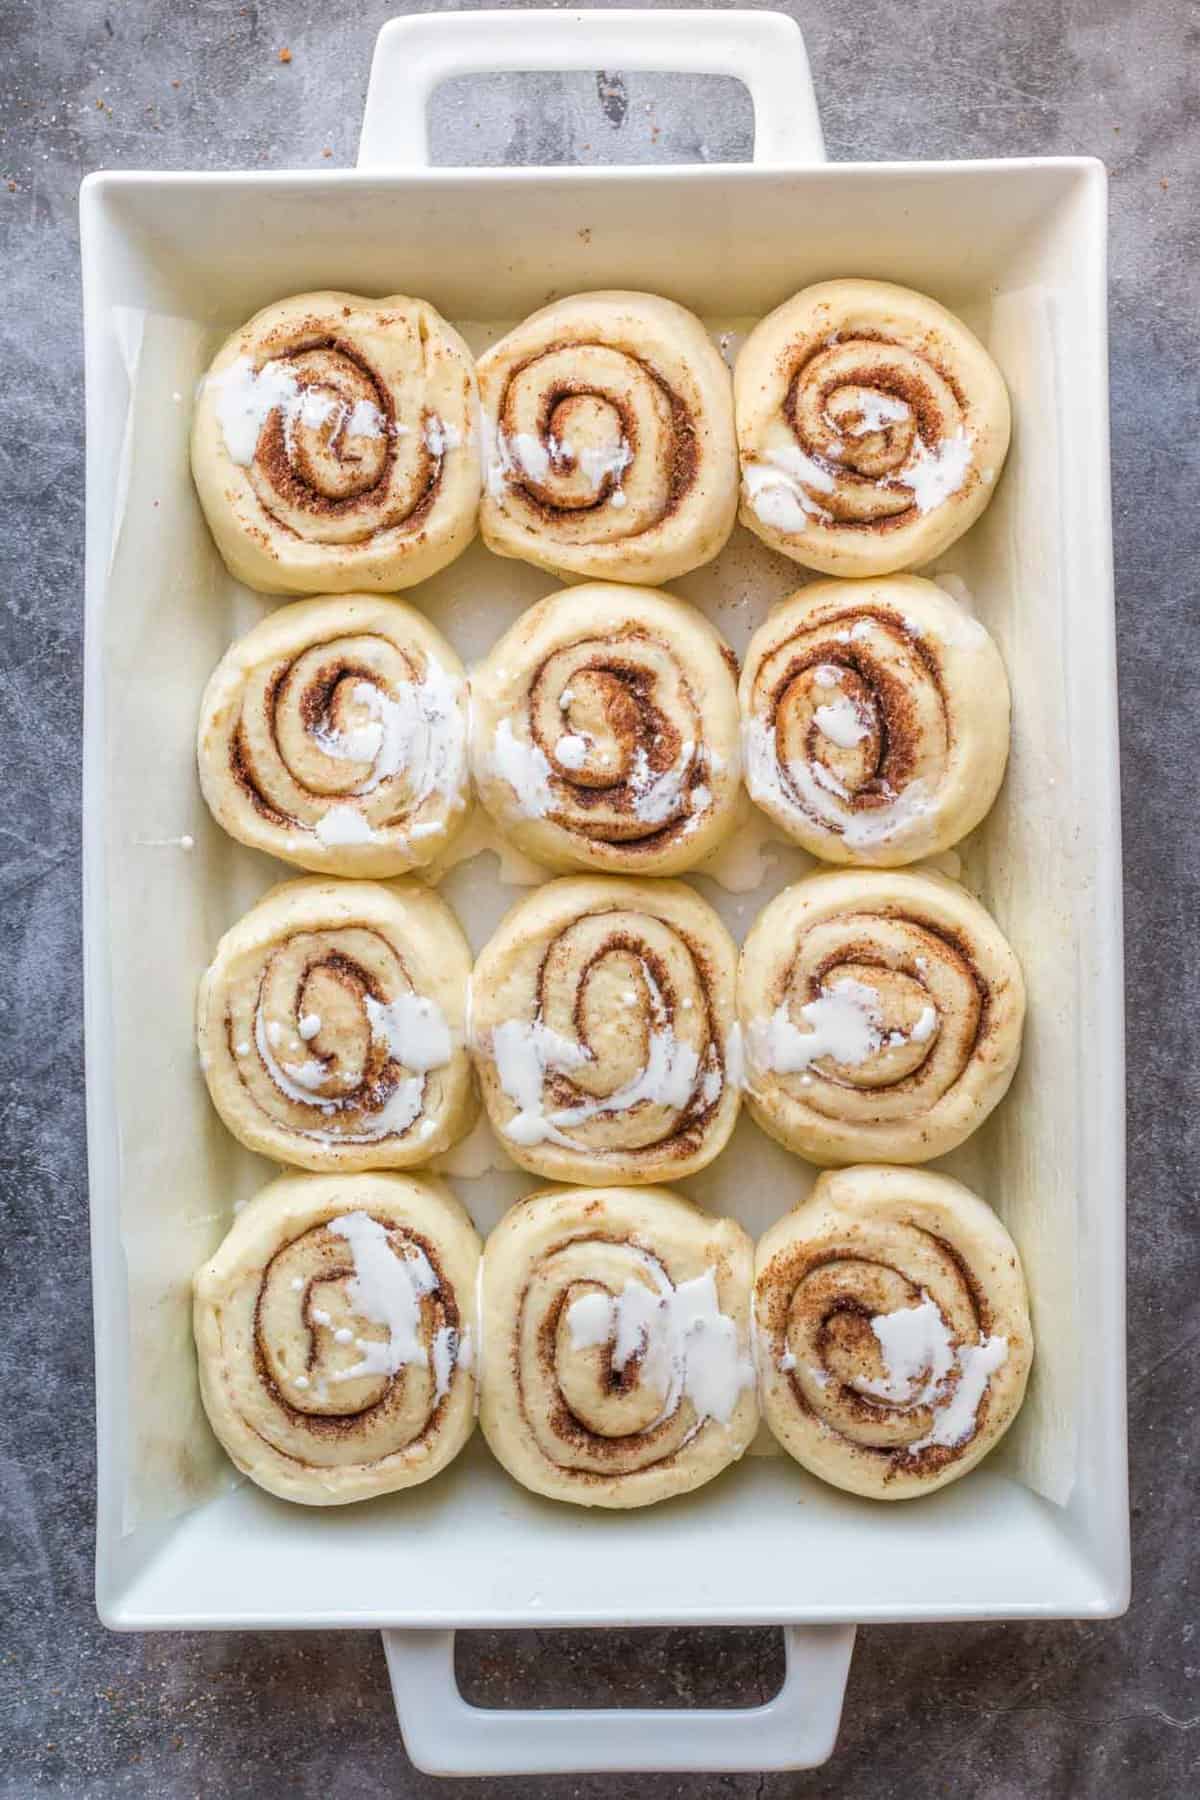 Cinnamon buns arranged in a baking dish, with heavy cream drizzled over them.